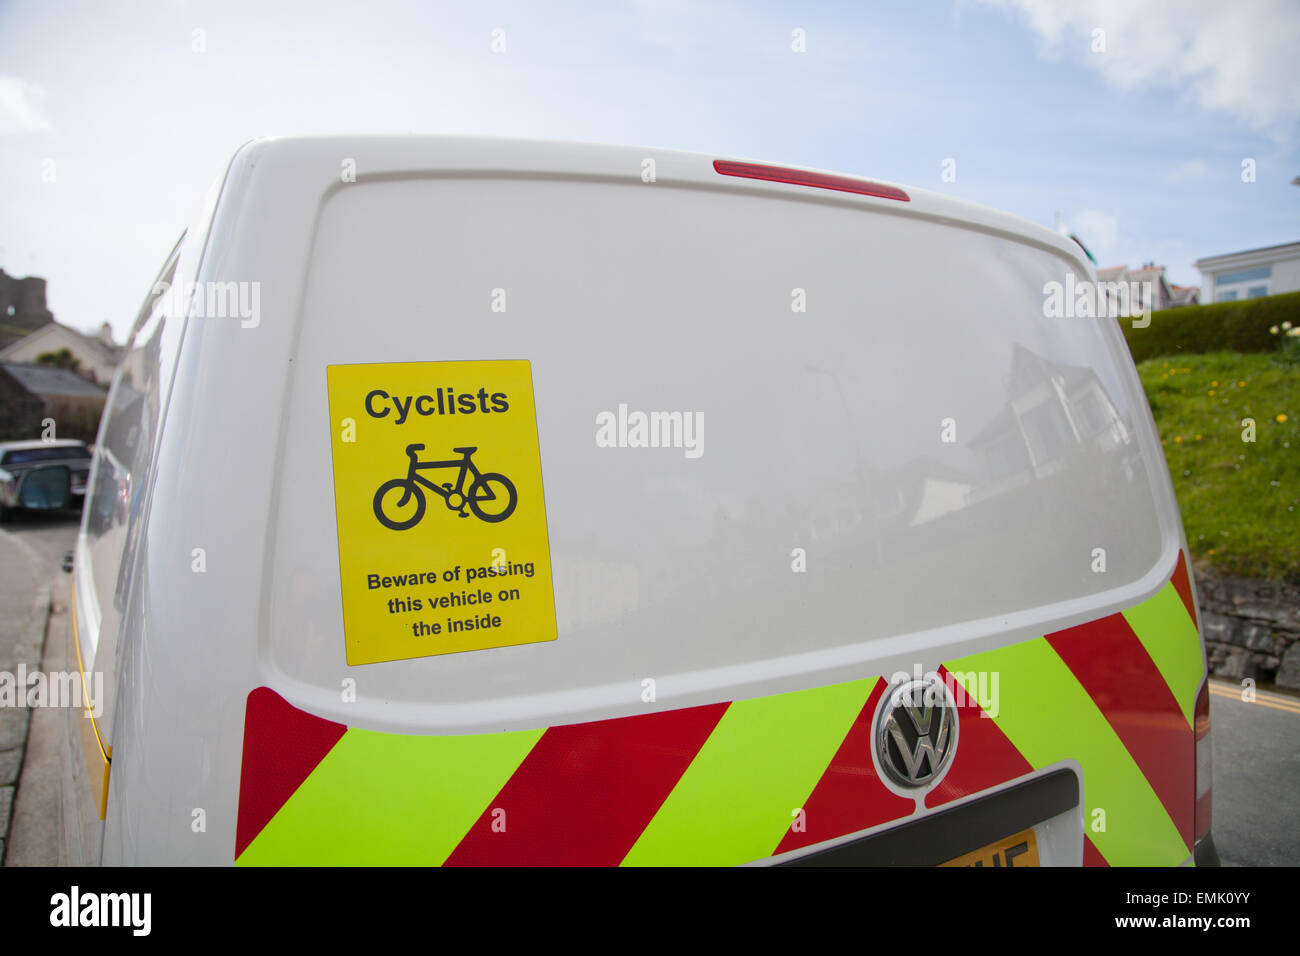 Lorry Bus Long Van Sticker Cyclists Beware Of Passing This Vehicle On The Left